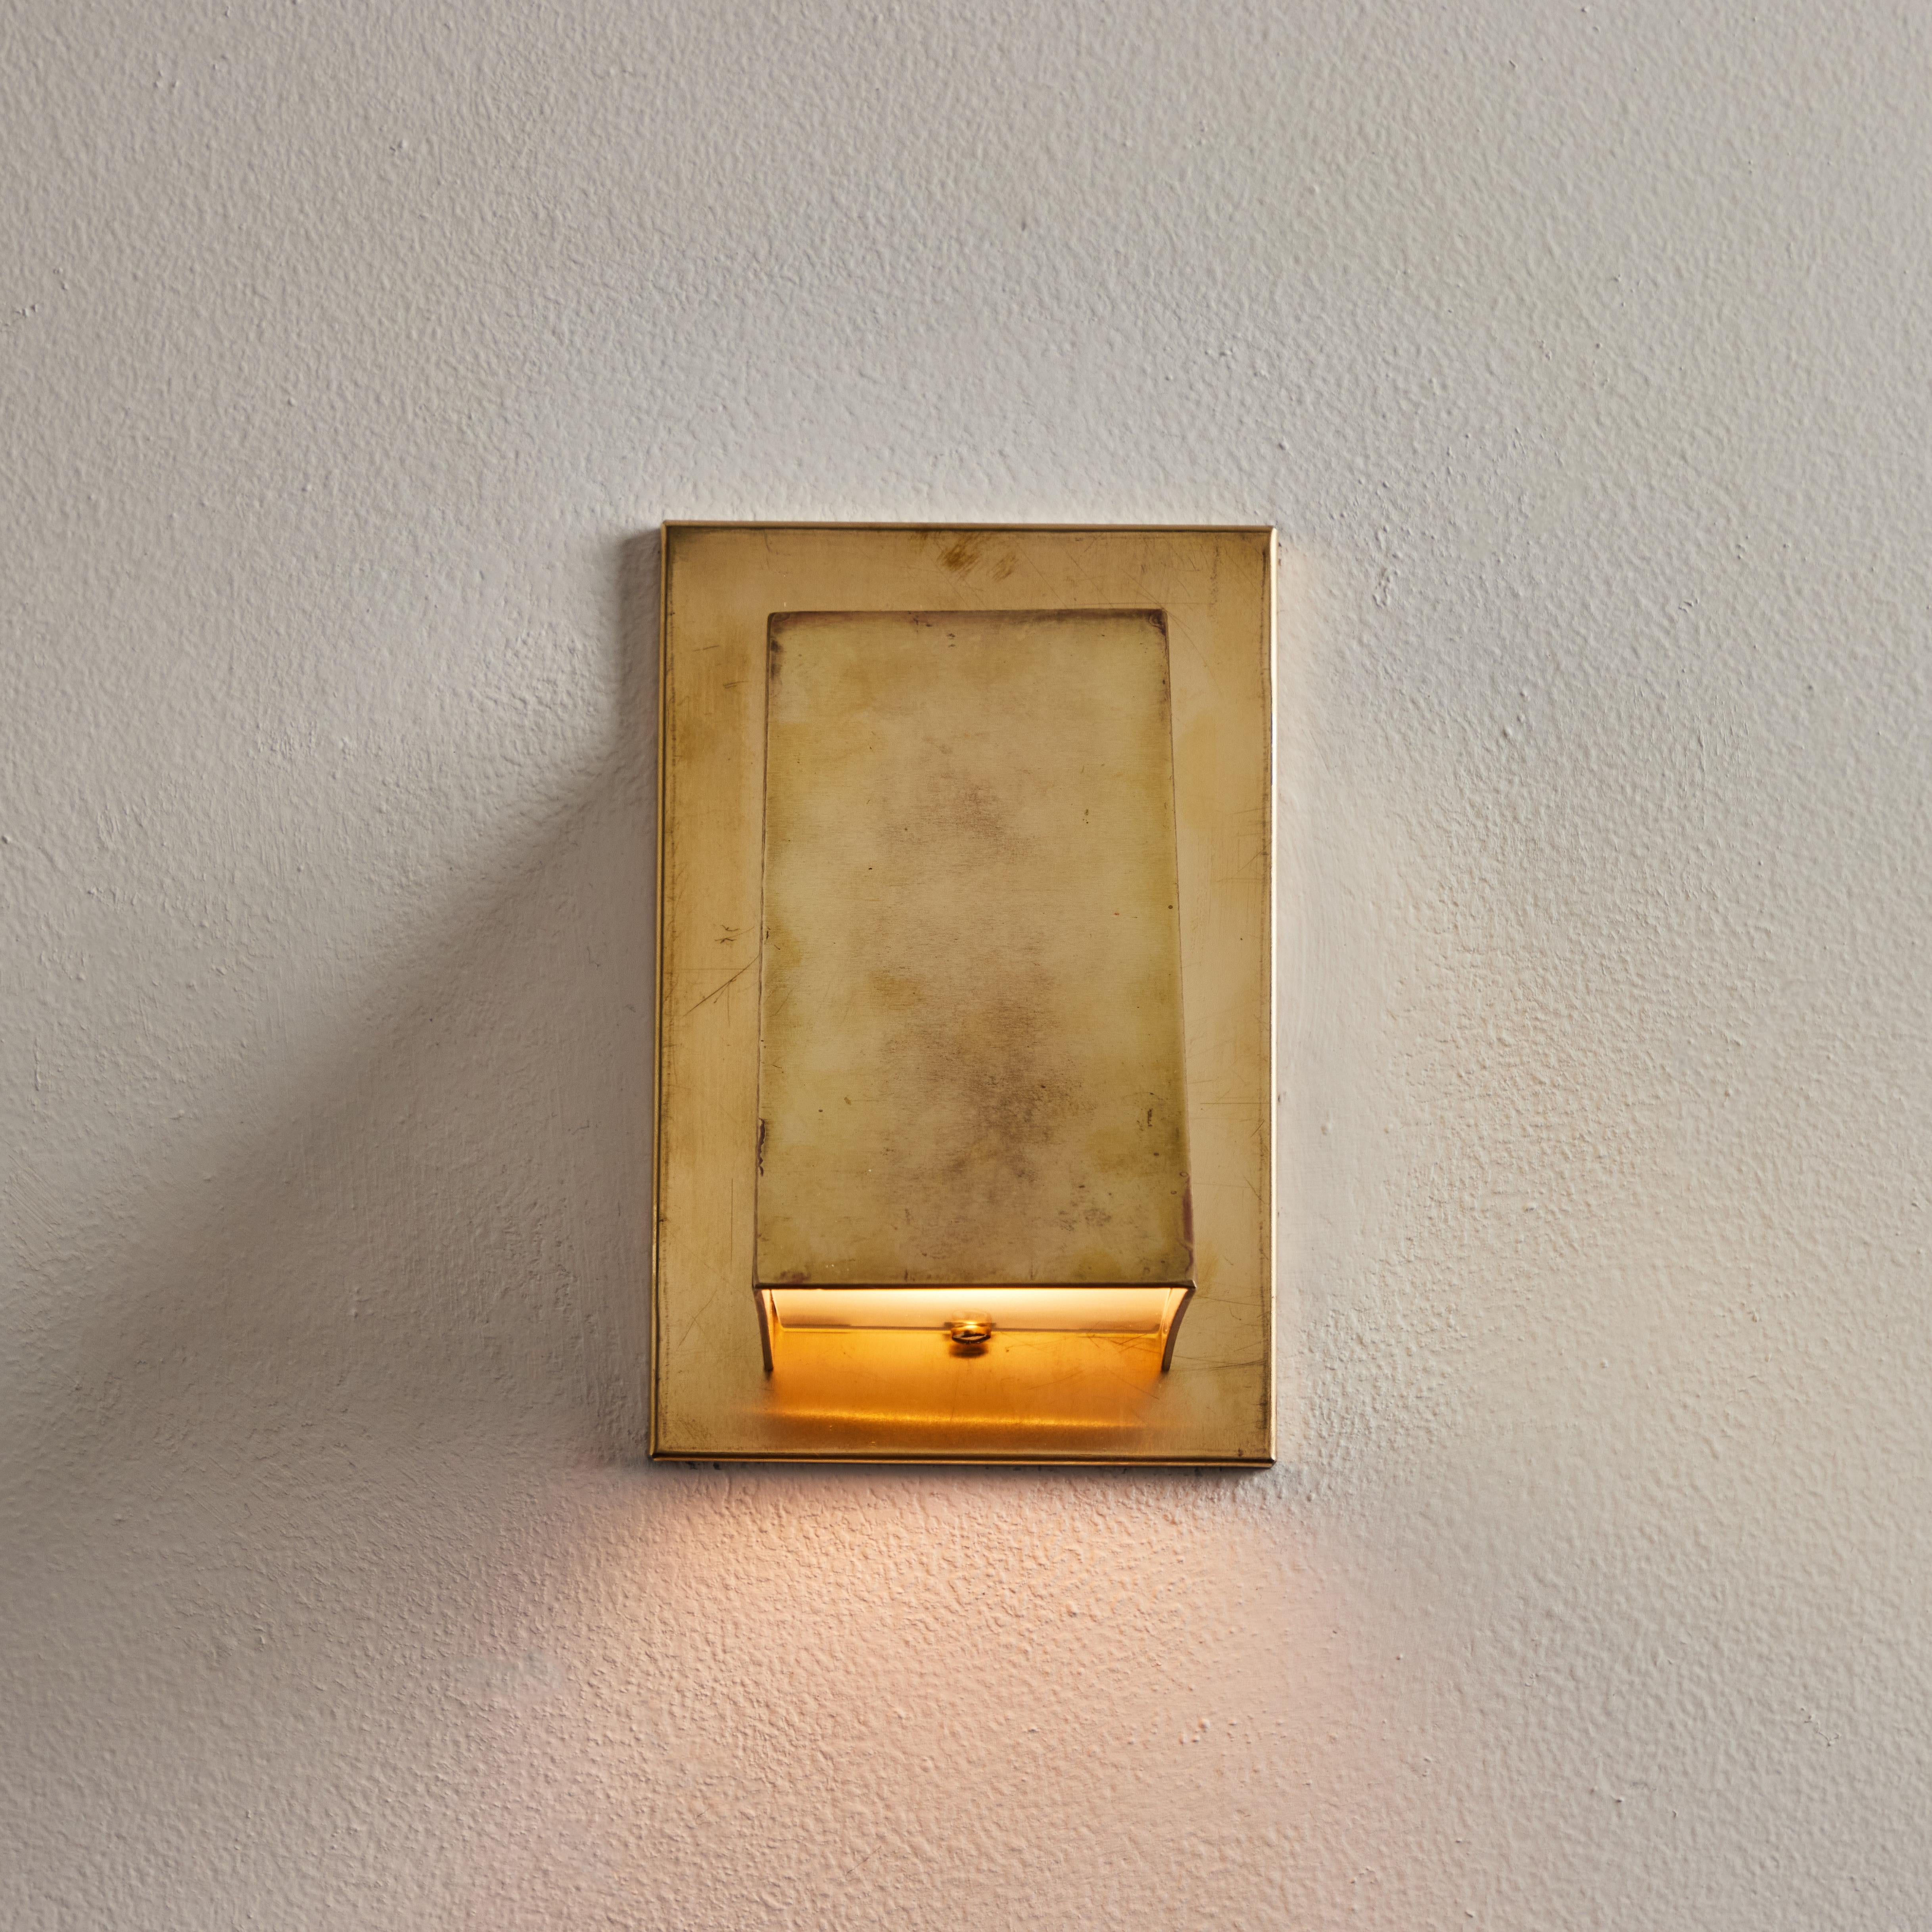 Pair of Jonas Bohlin 'Oxid' Raw Brass Outdoor Wall Lights for Örsjö. Executed in raw unlacquered and unpolished brass with an opaline glass diffuser. An incredibly refined and clean geometric design that is quintessentially Scandinavian. For indoor